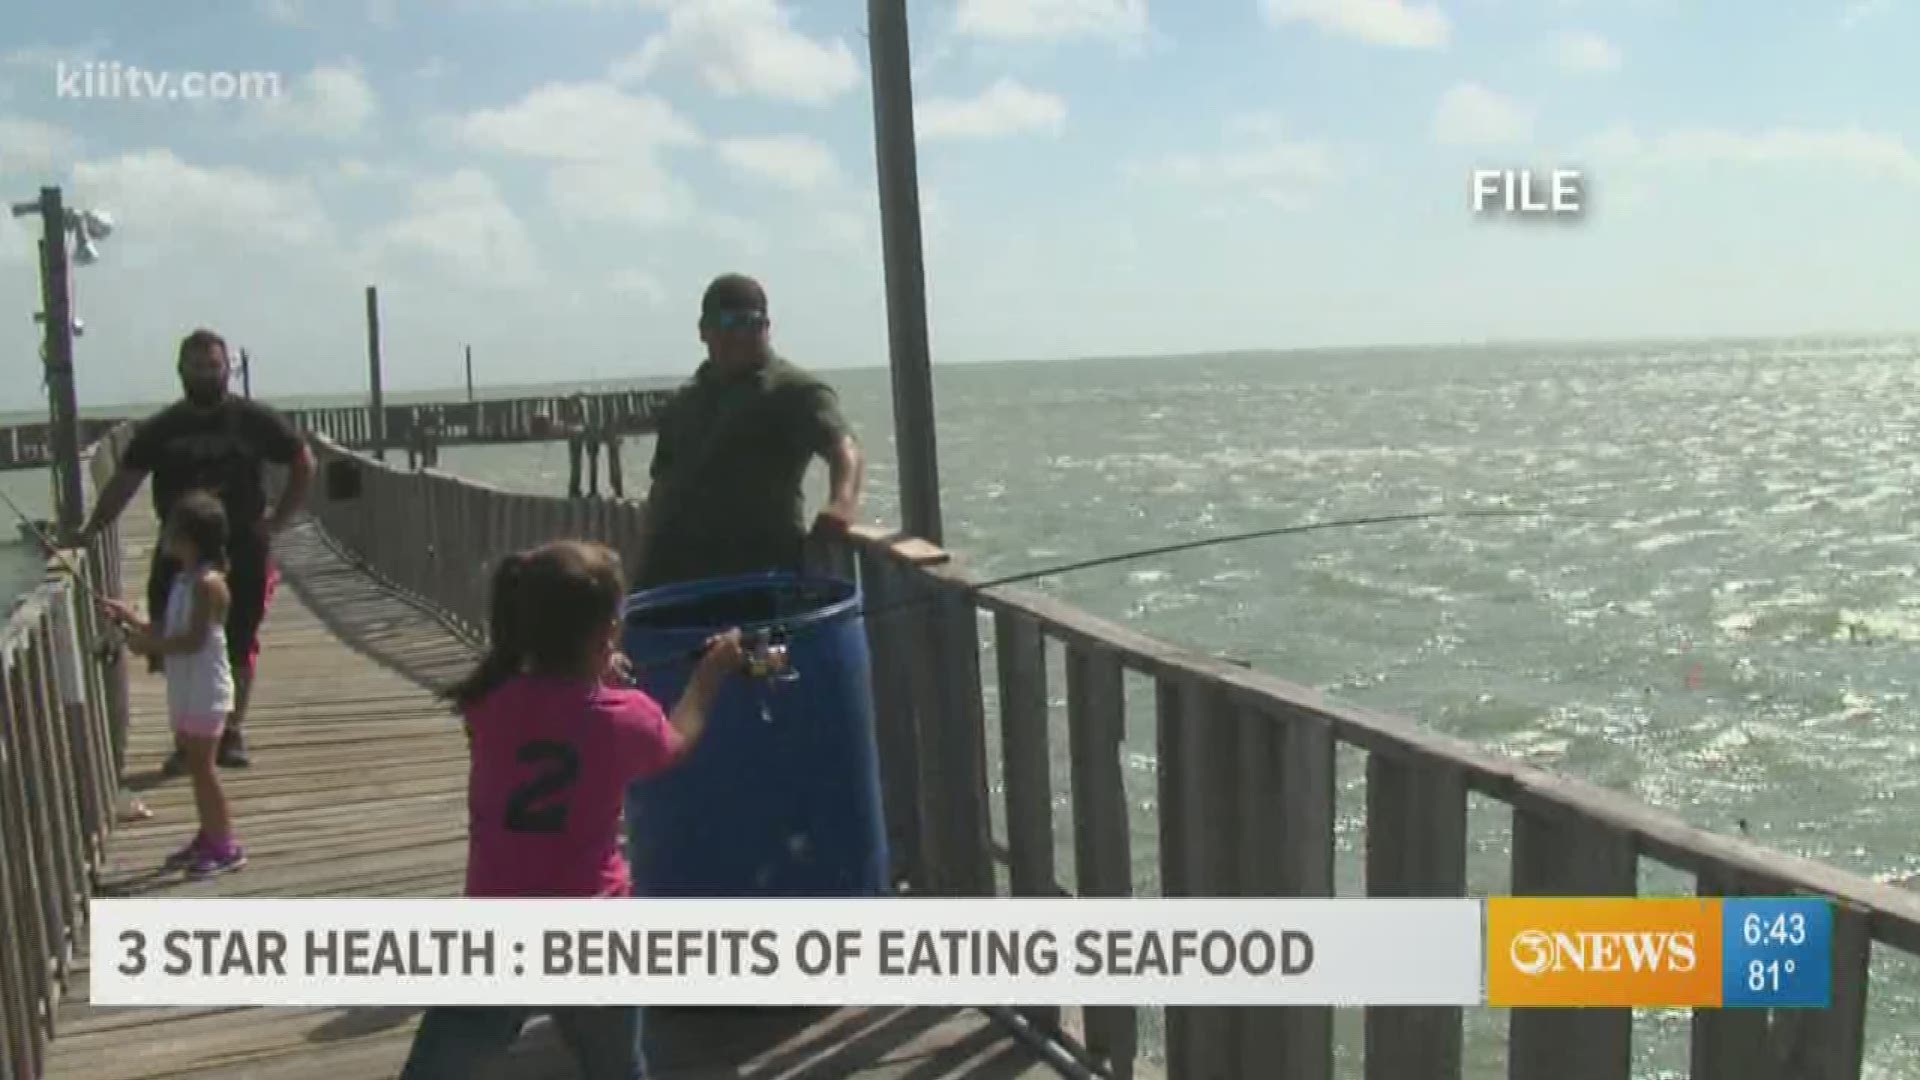 Discussing the health benefits of seafood in children with Dr. Salim Surani.